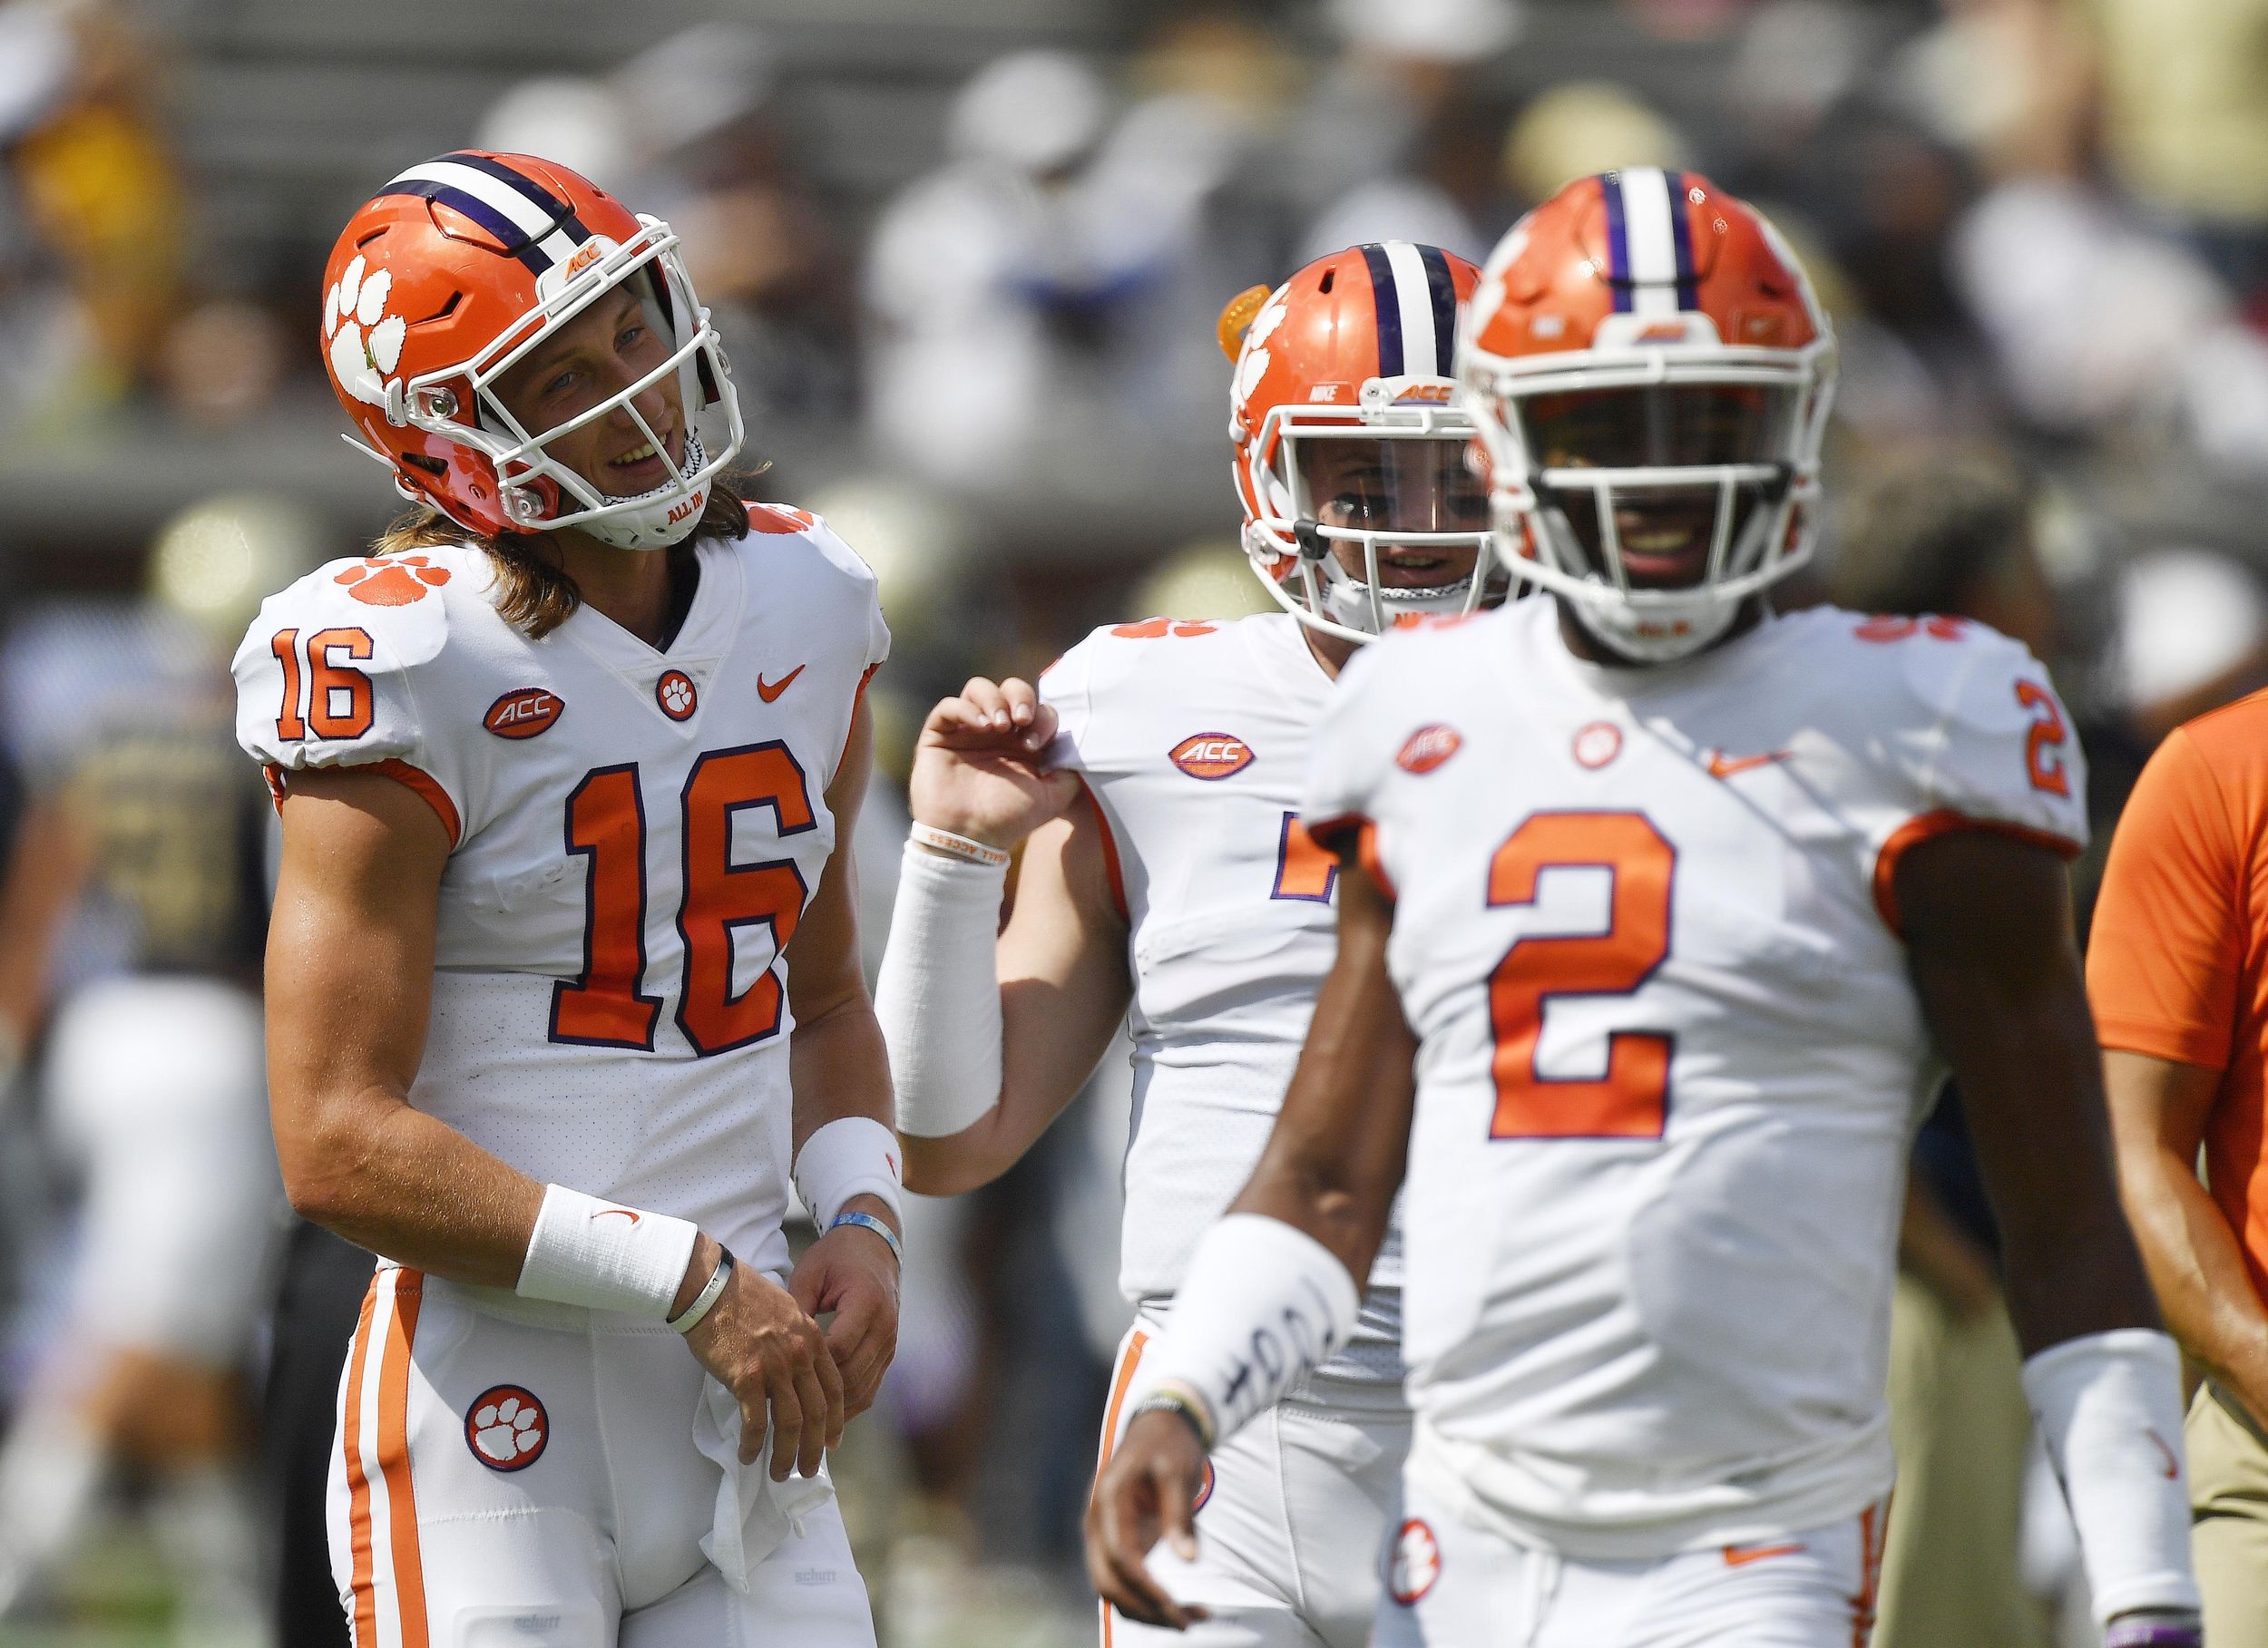 Clemson Qb Kelly Bryant Transferring After Losing Starting Job The Spokesman Review 